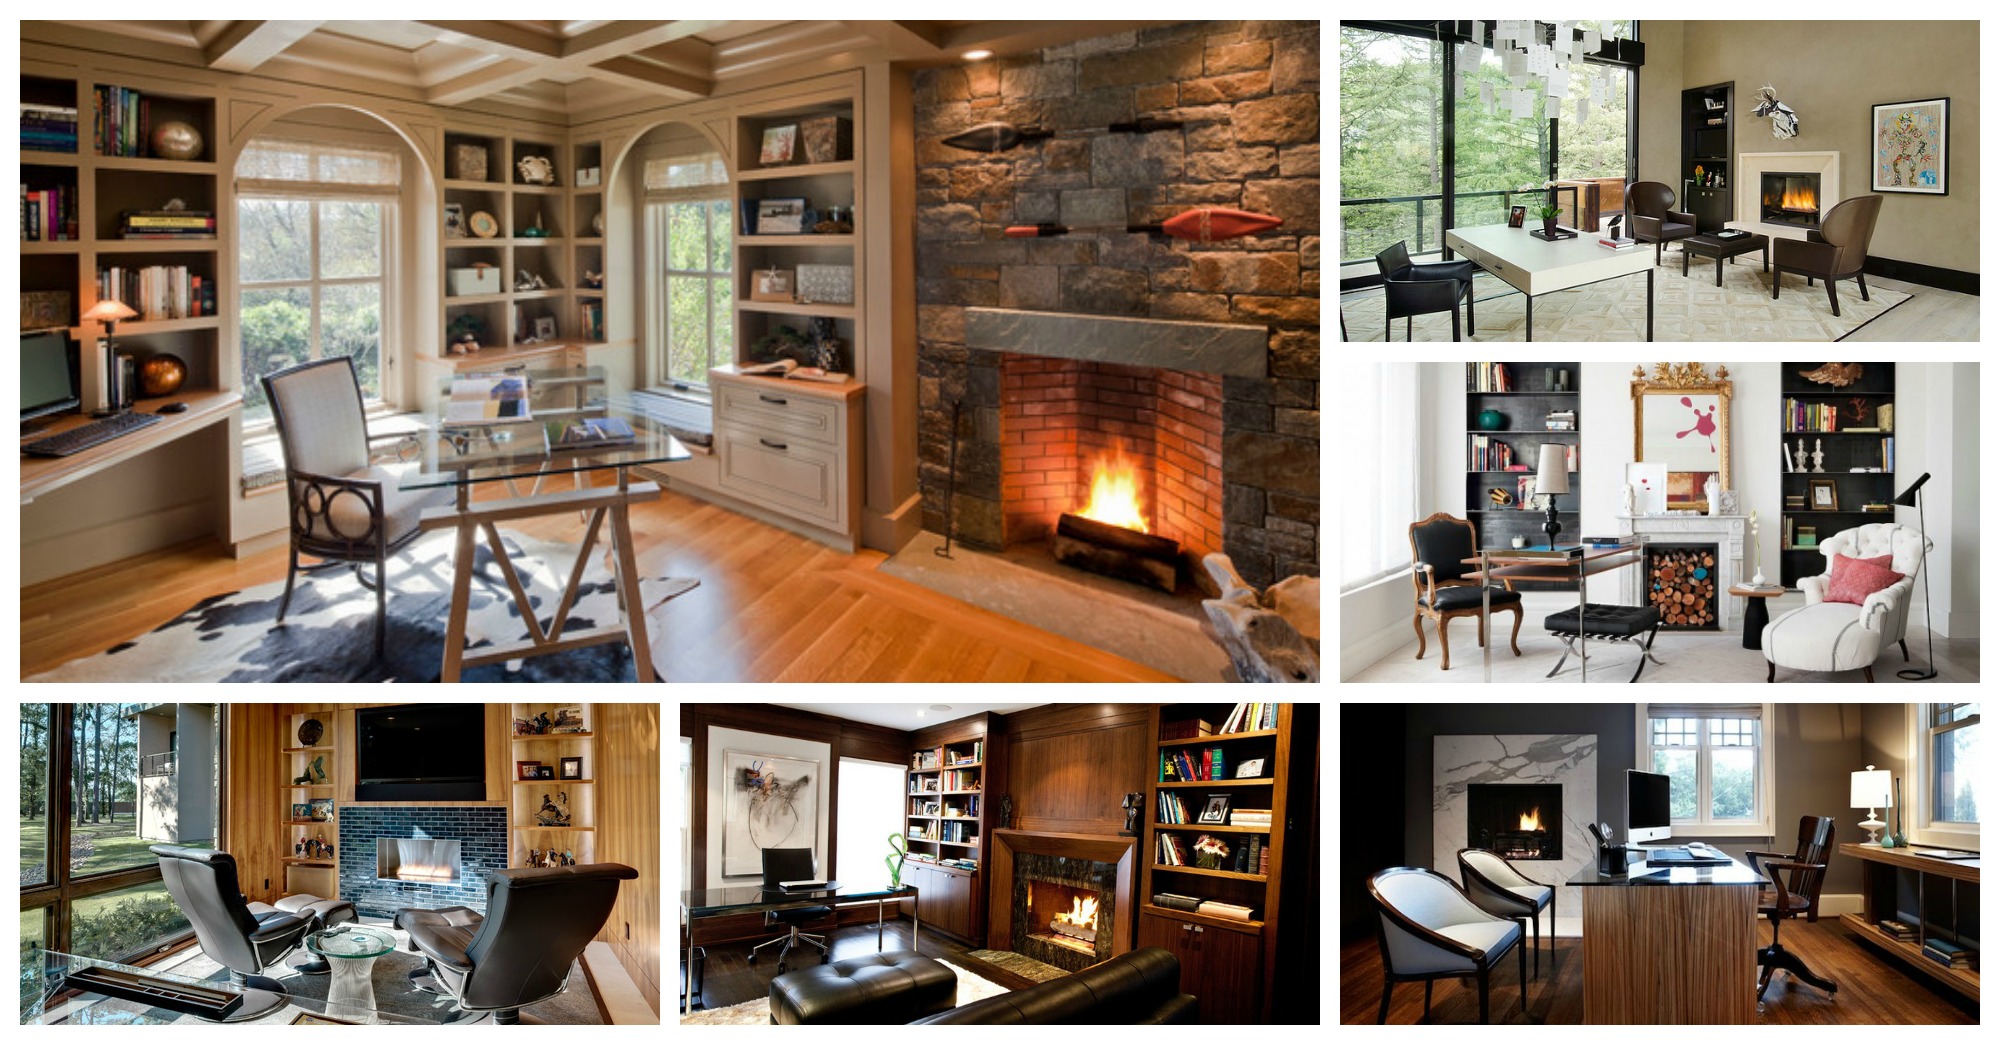 15 Warm And Cozy Home Office Designs With Fireplaces